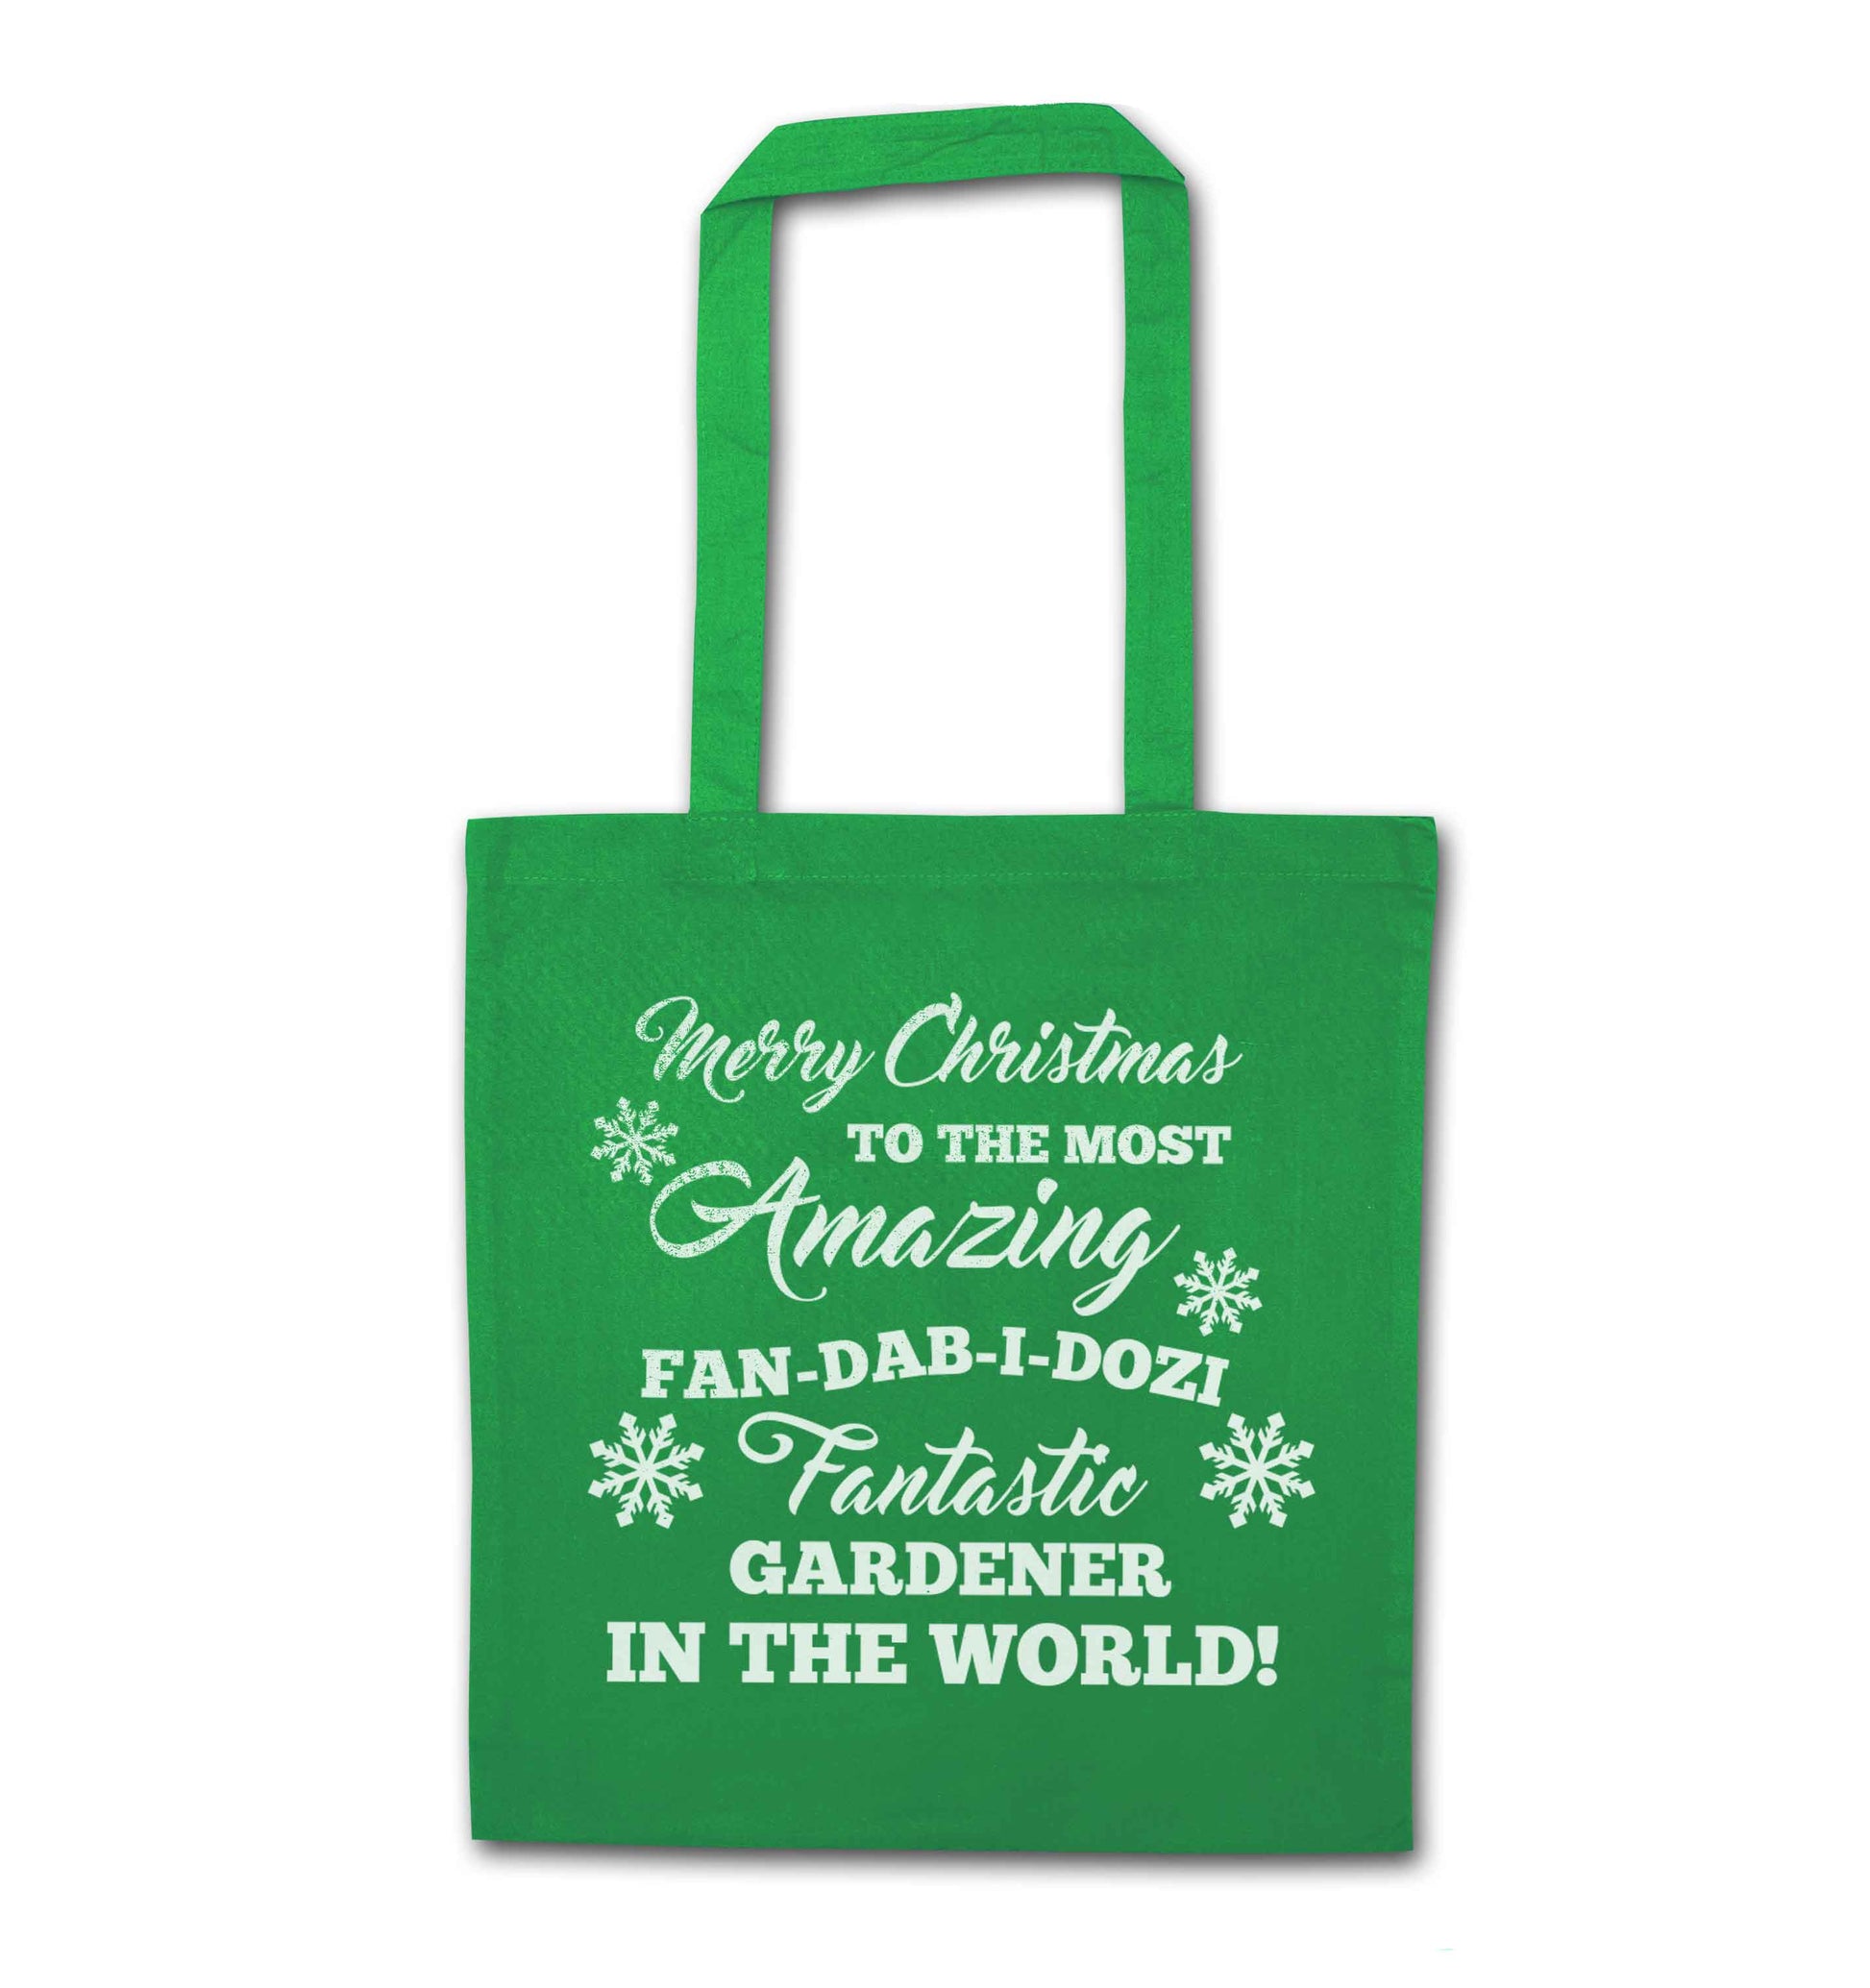 Merry Christmas to the most amazing gardener in the world! green tote bag